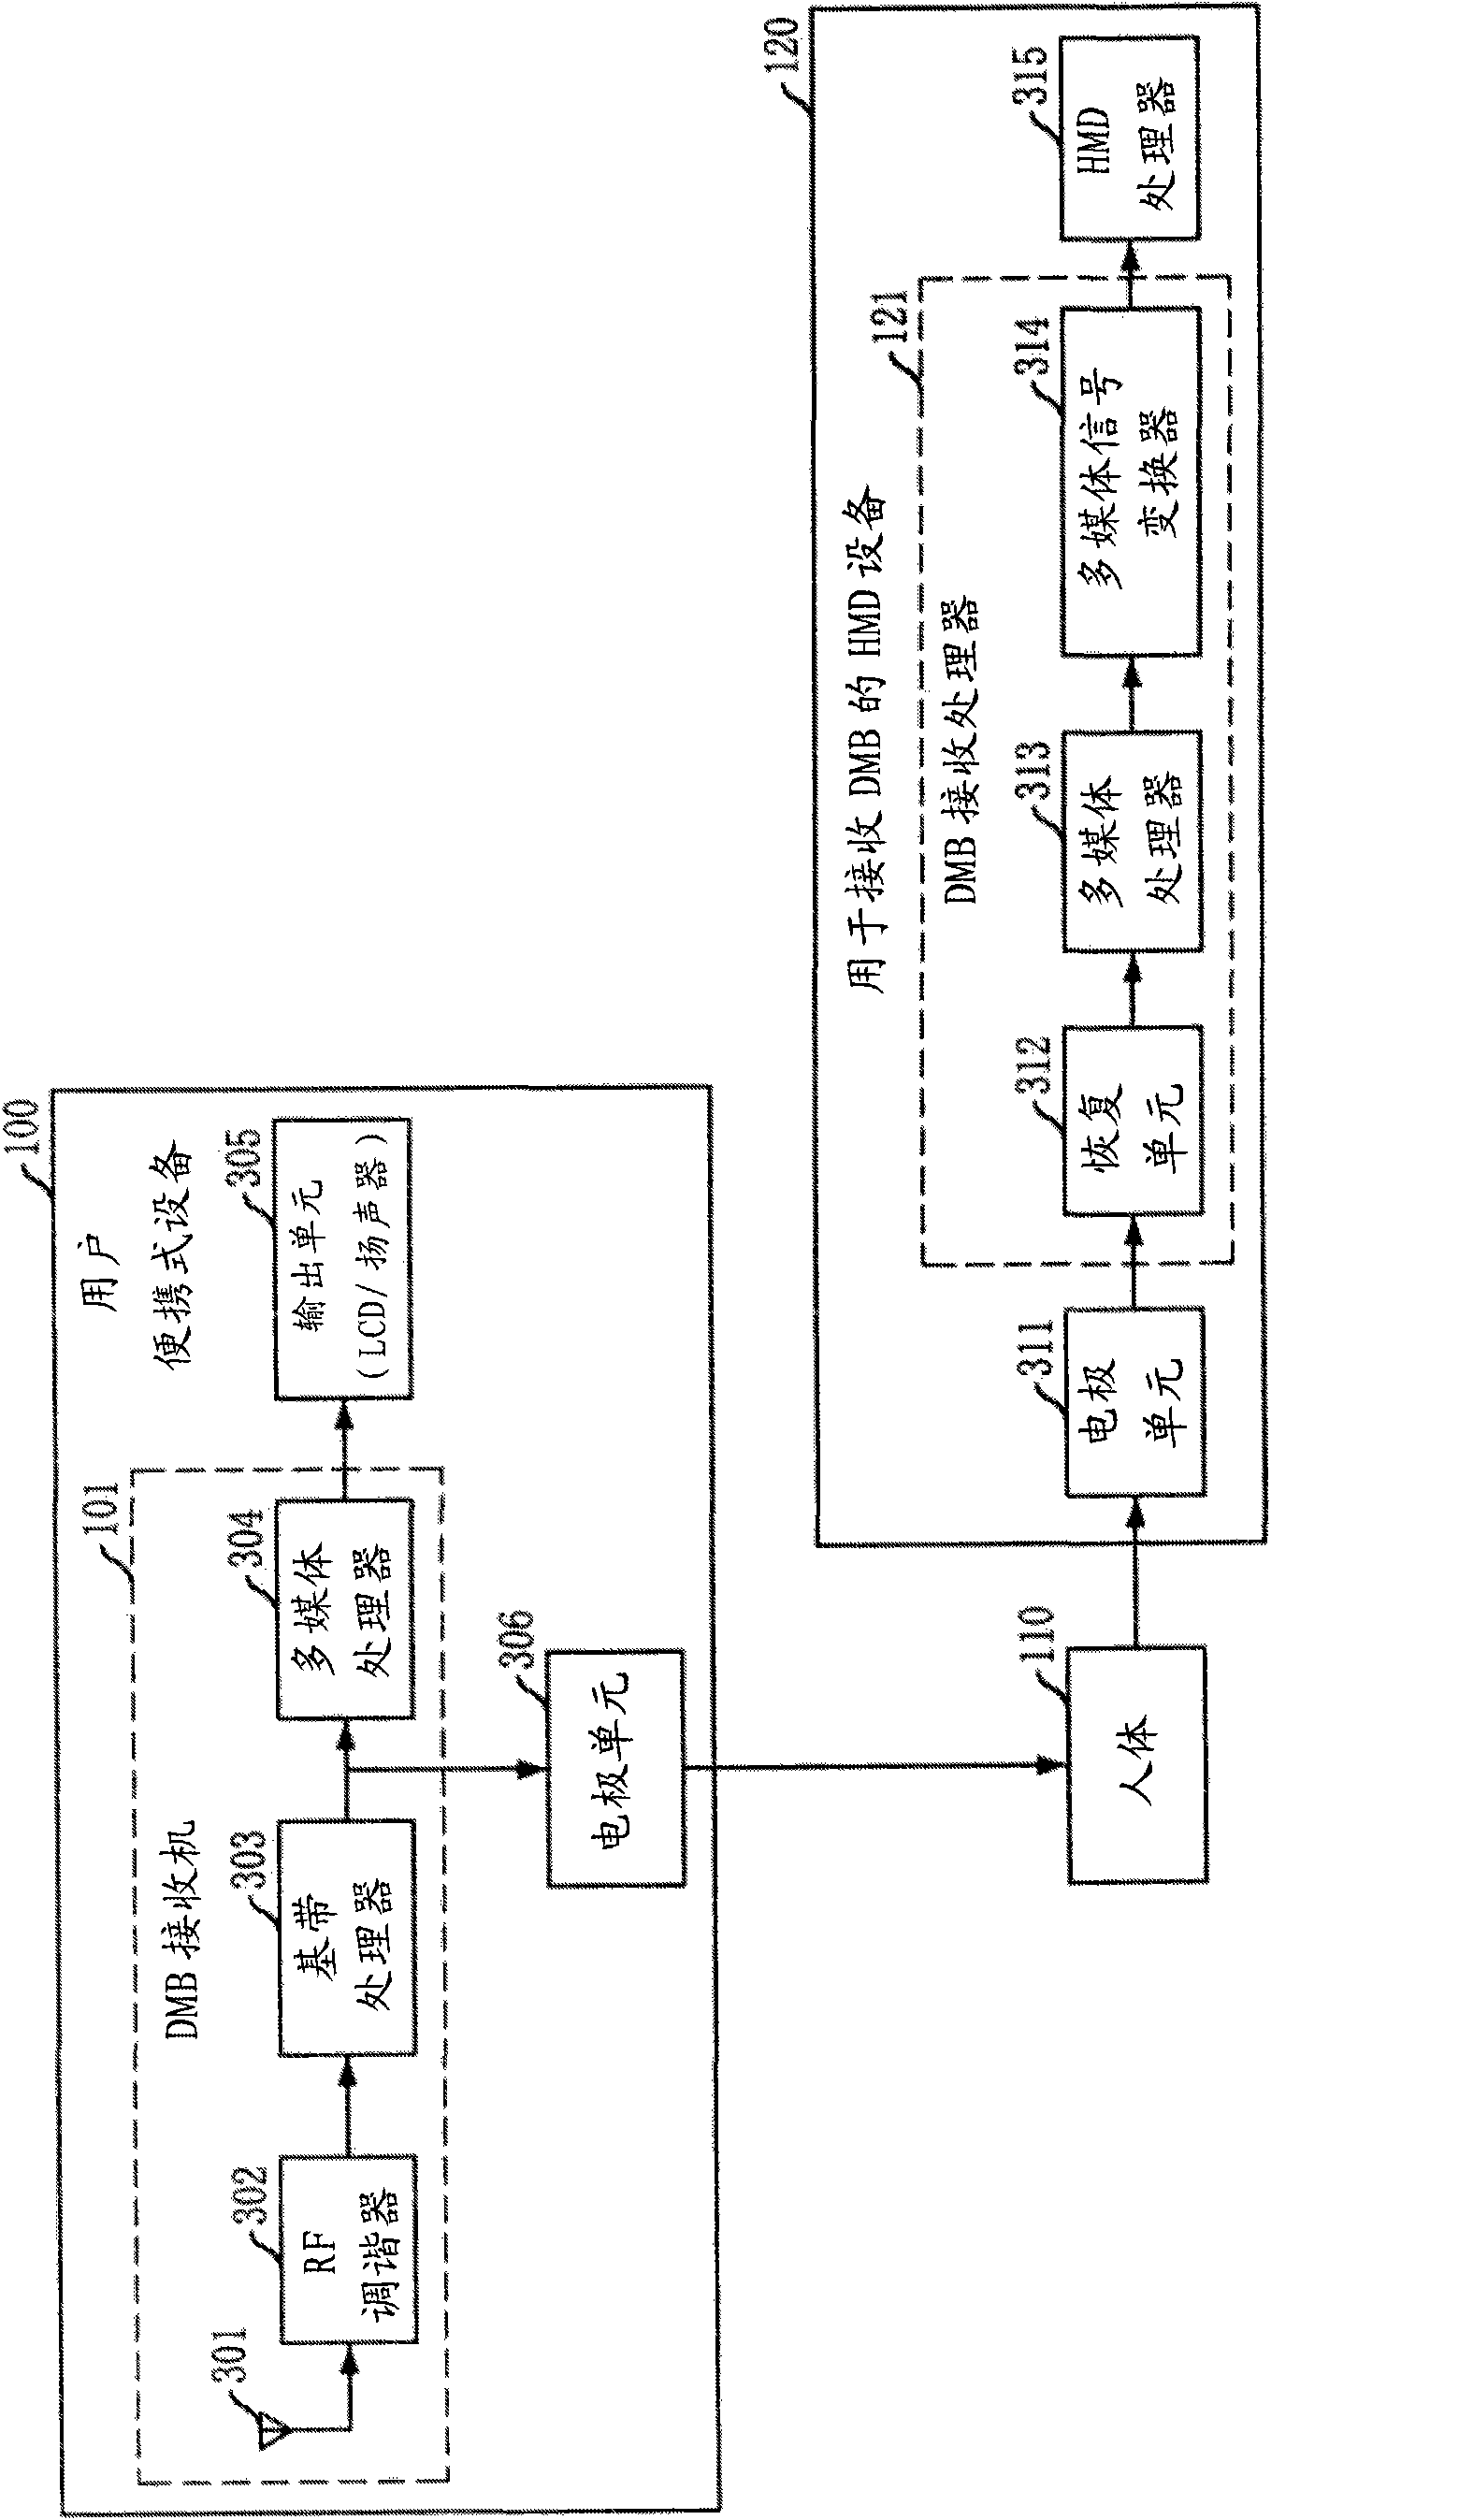 Dmb receiving portable terminal for human body communication, dmb transmitting method thereof, and hmd apparatus and method for dmb reception using human body communication